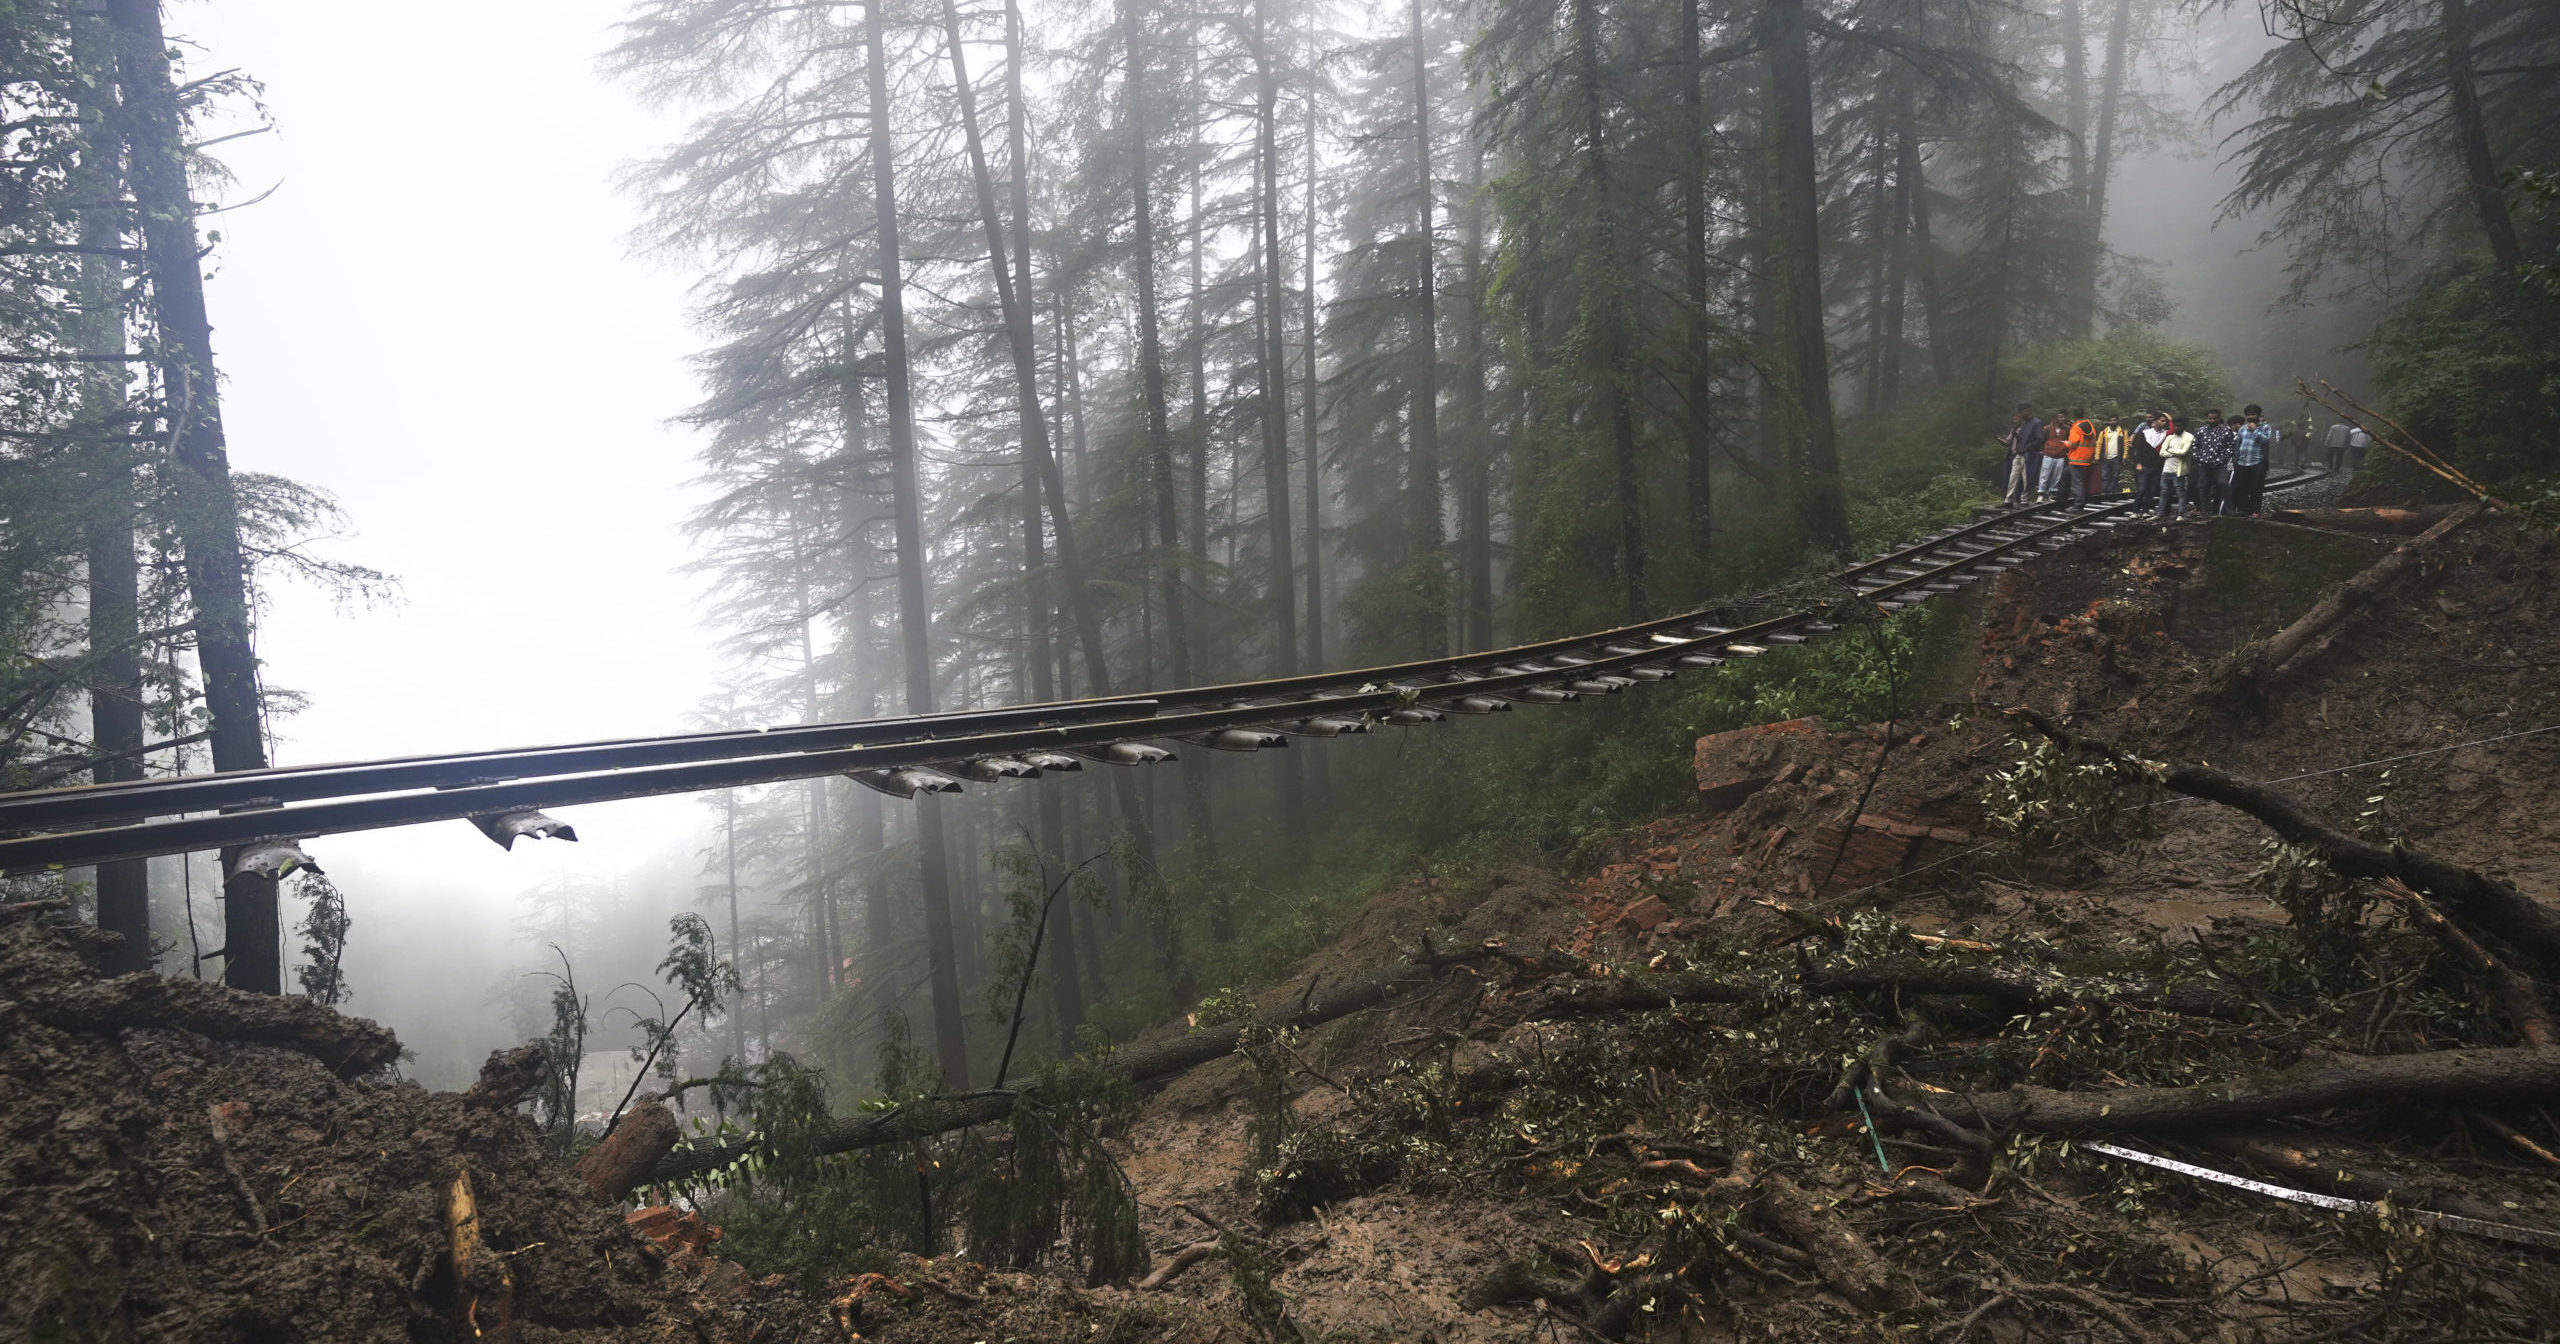 A portion of the Shimla-Kalka heritage railway track in India was washed away following heavy rainfall on the outskirts of Shimla, Himachal Pradesh state, on Monday.